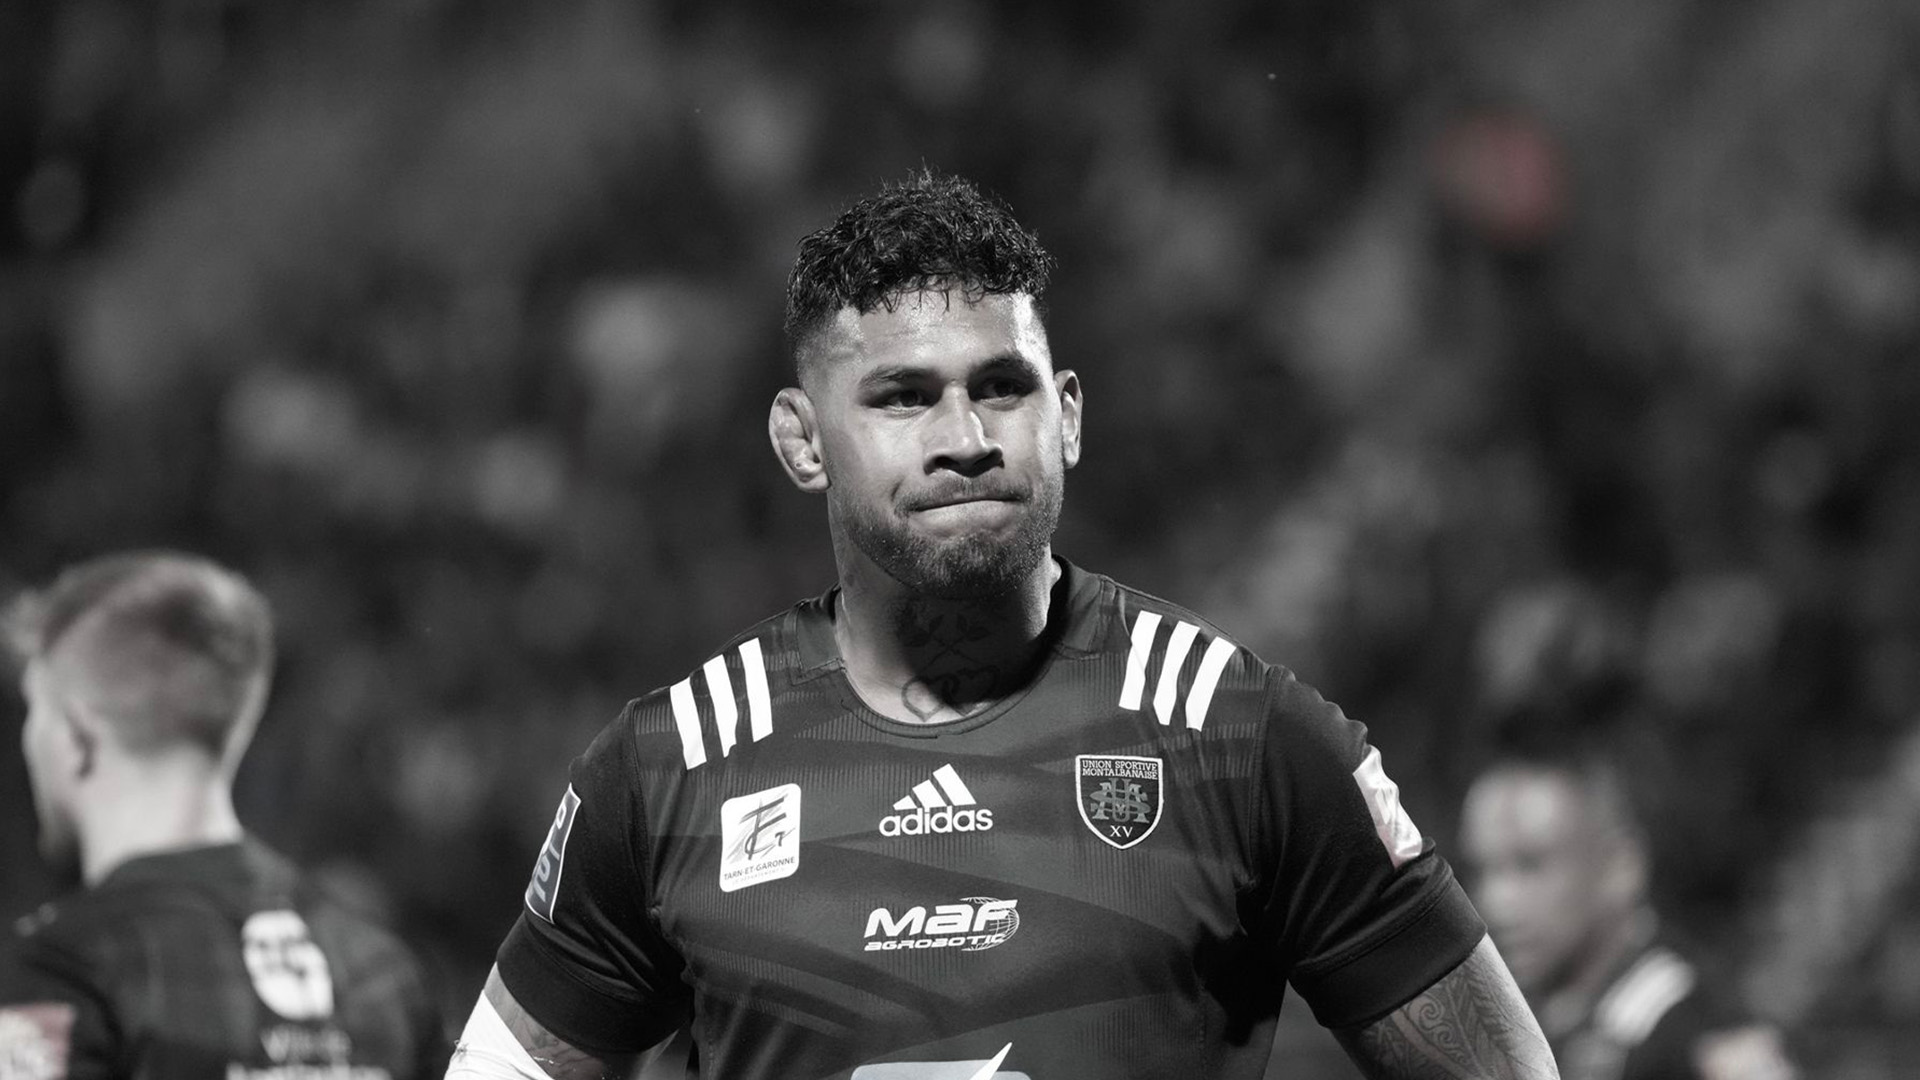 HOMMAGE A KELLY MEAFUA